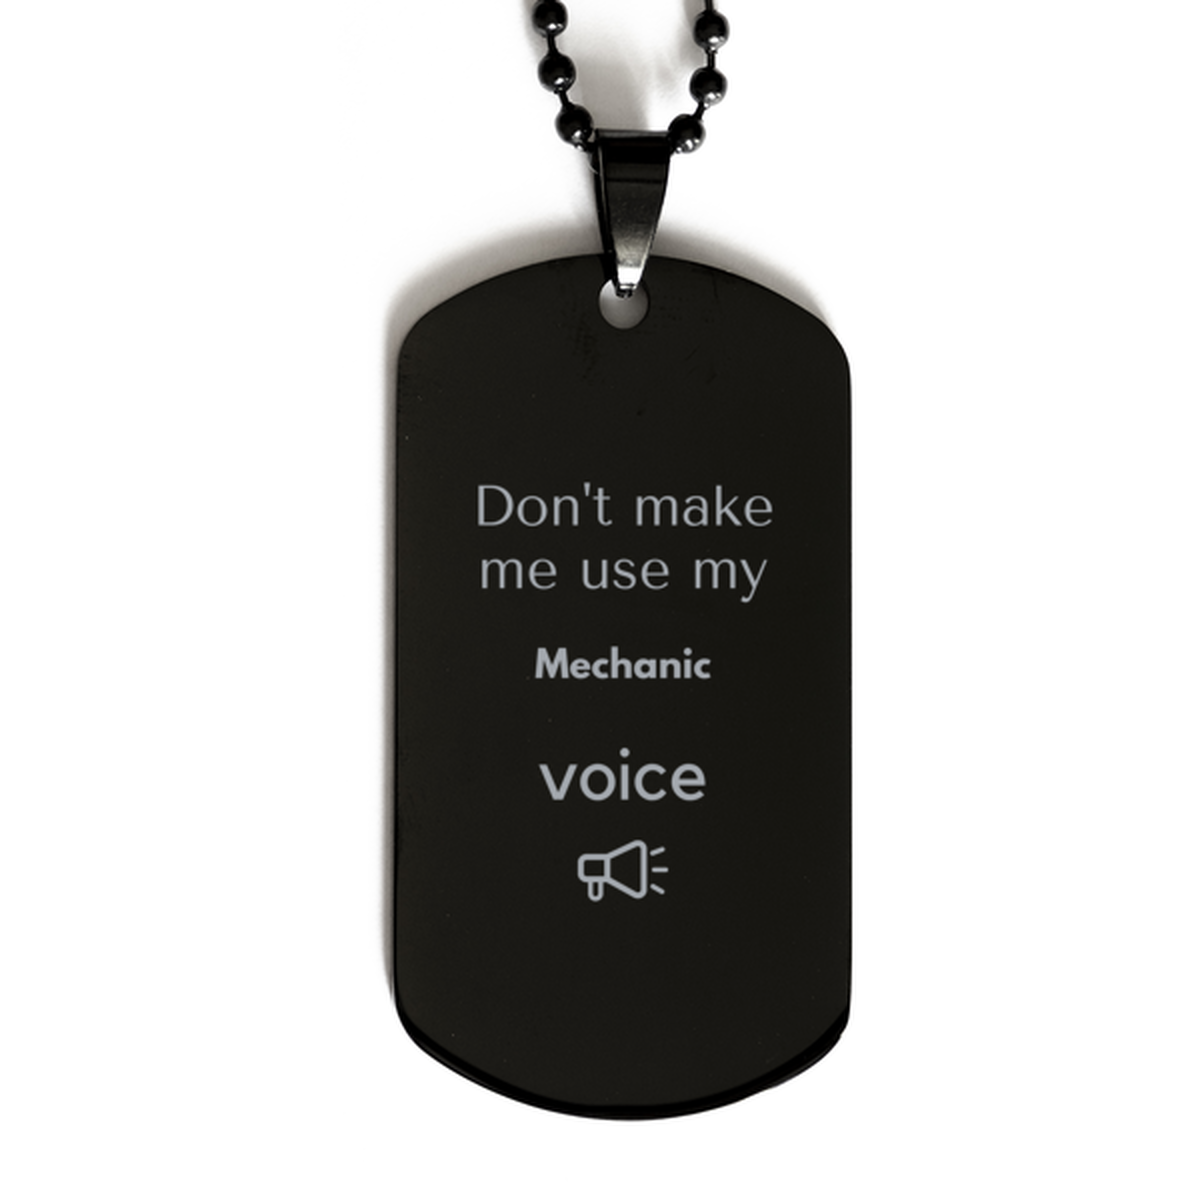 Don't make me use my Mechanic voice, Sarcasm Mechanic Gifts, Christmas Mechanic Black Dog Tag Birthday Unique Gifts For Mechanic Coworkers, Men, Women, Colleague, Friends